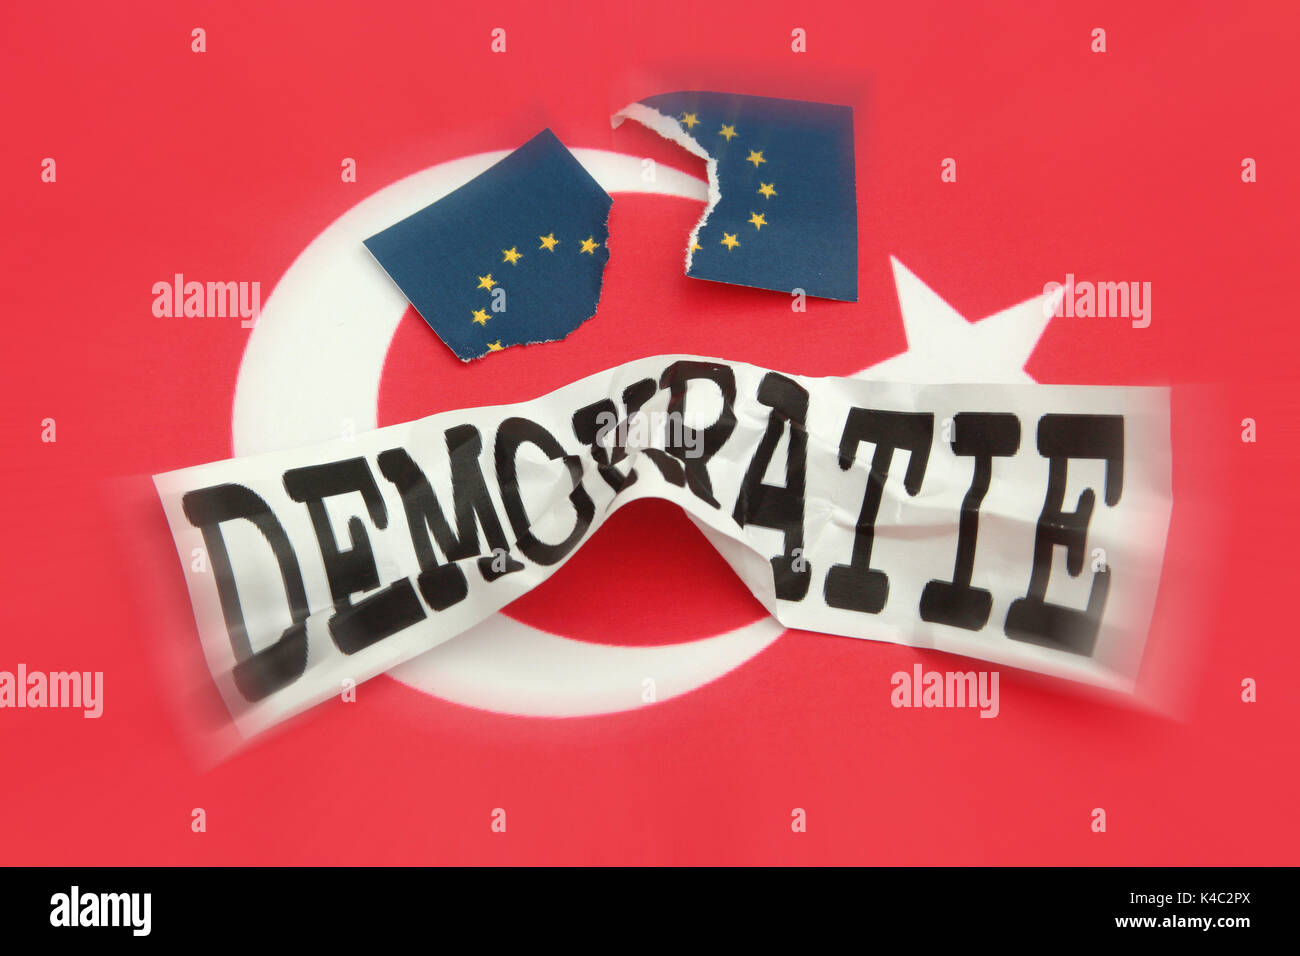 Destroyed Word Democracy With Flags Of Turkey And Eu European Union Stock Photo